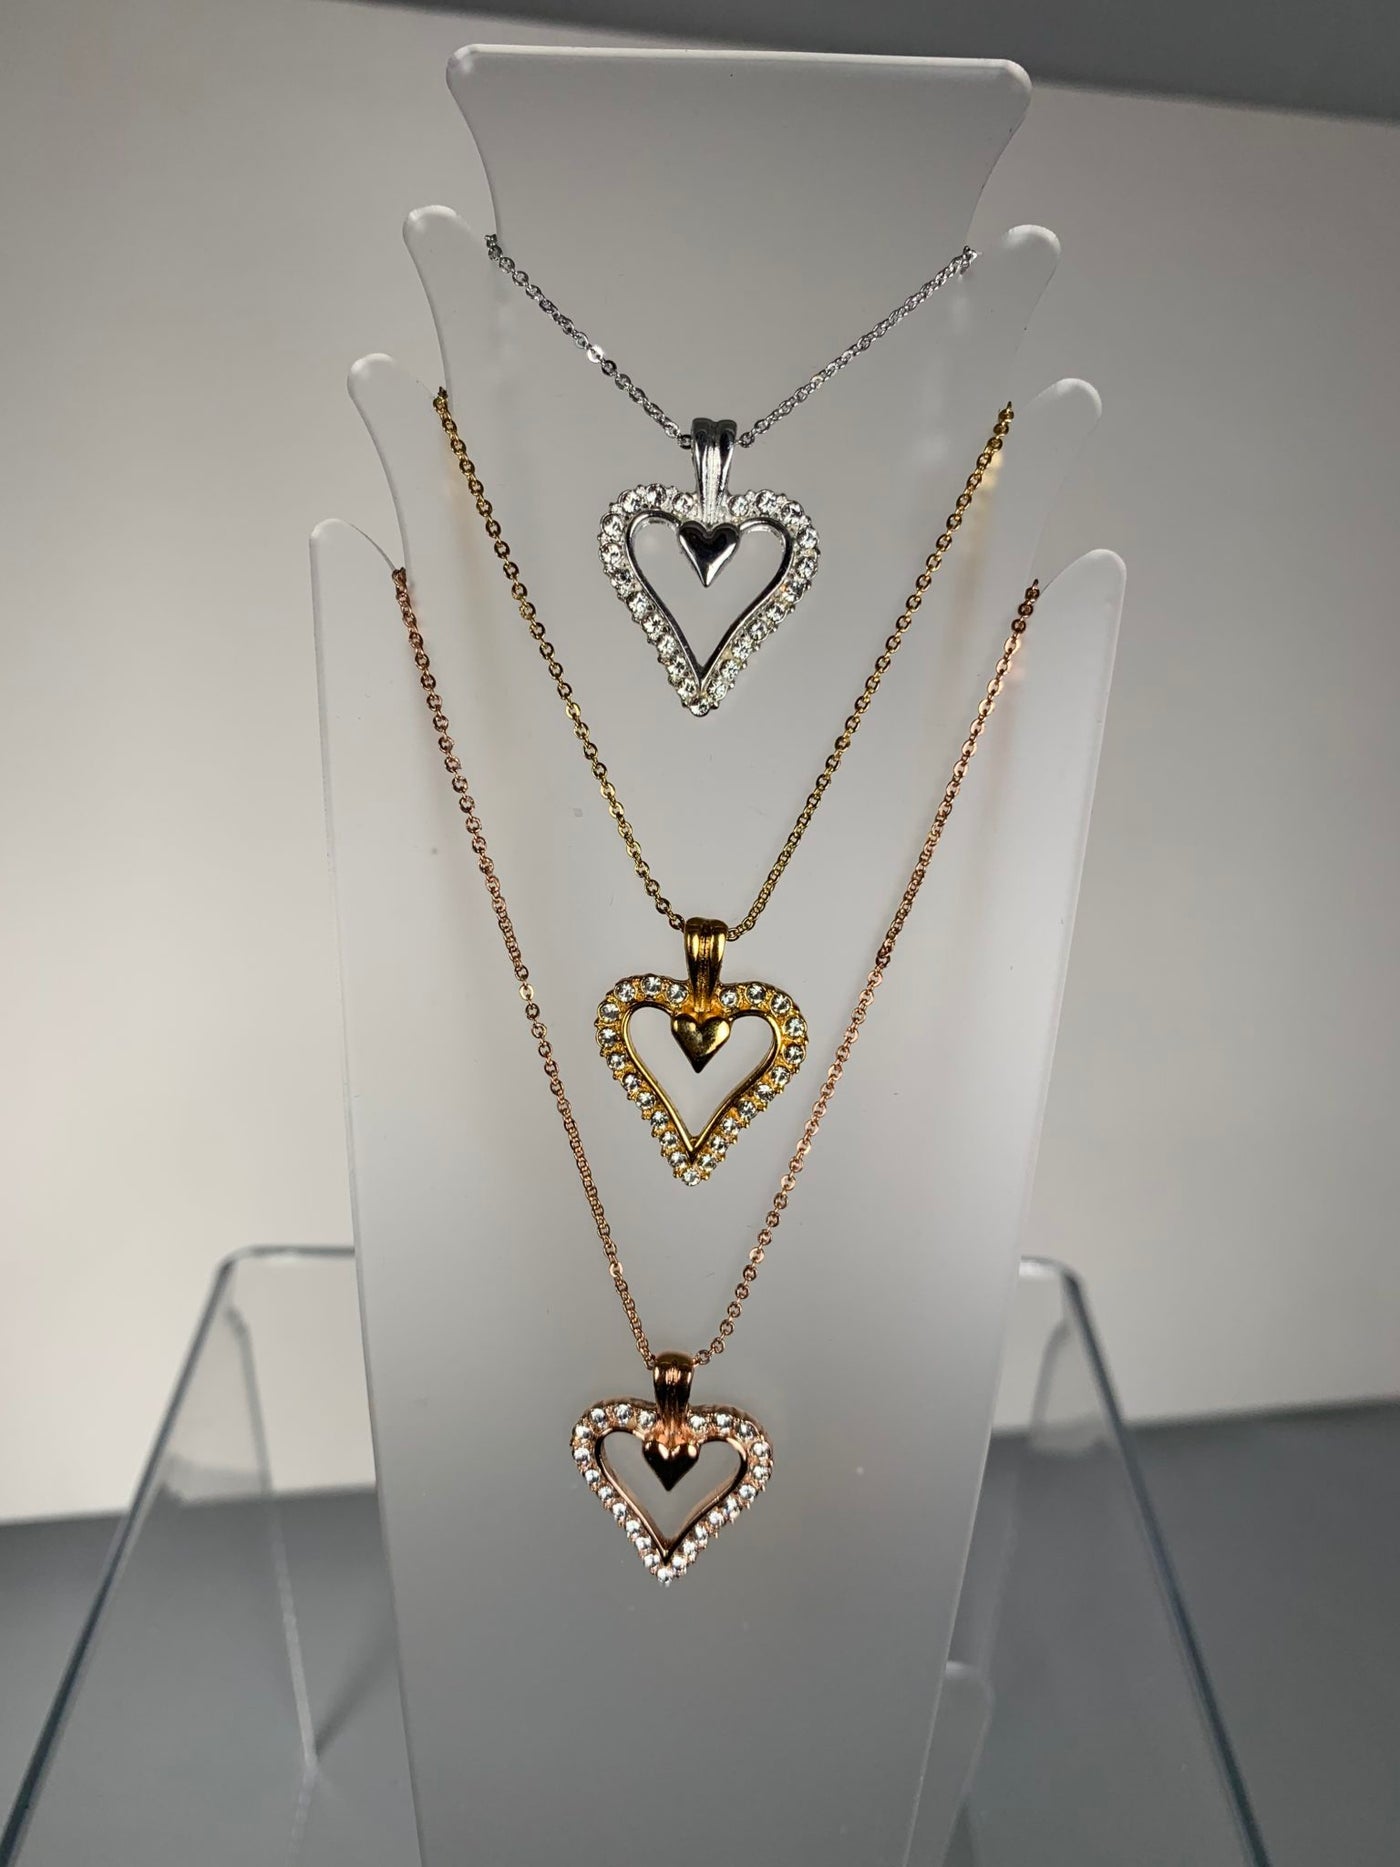 Silver Tone Crystal Heart Pendant and Chain Necklace Set